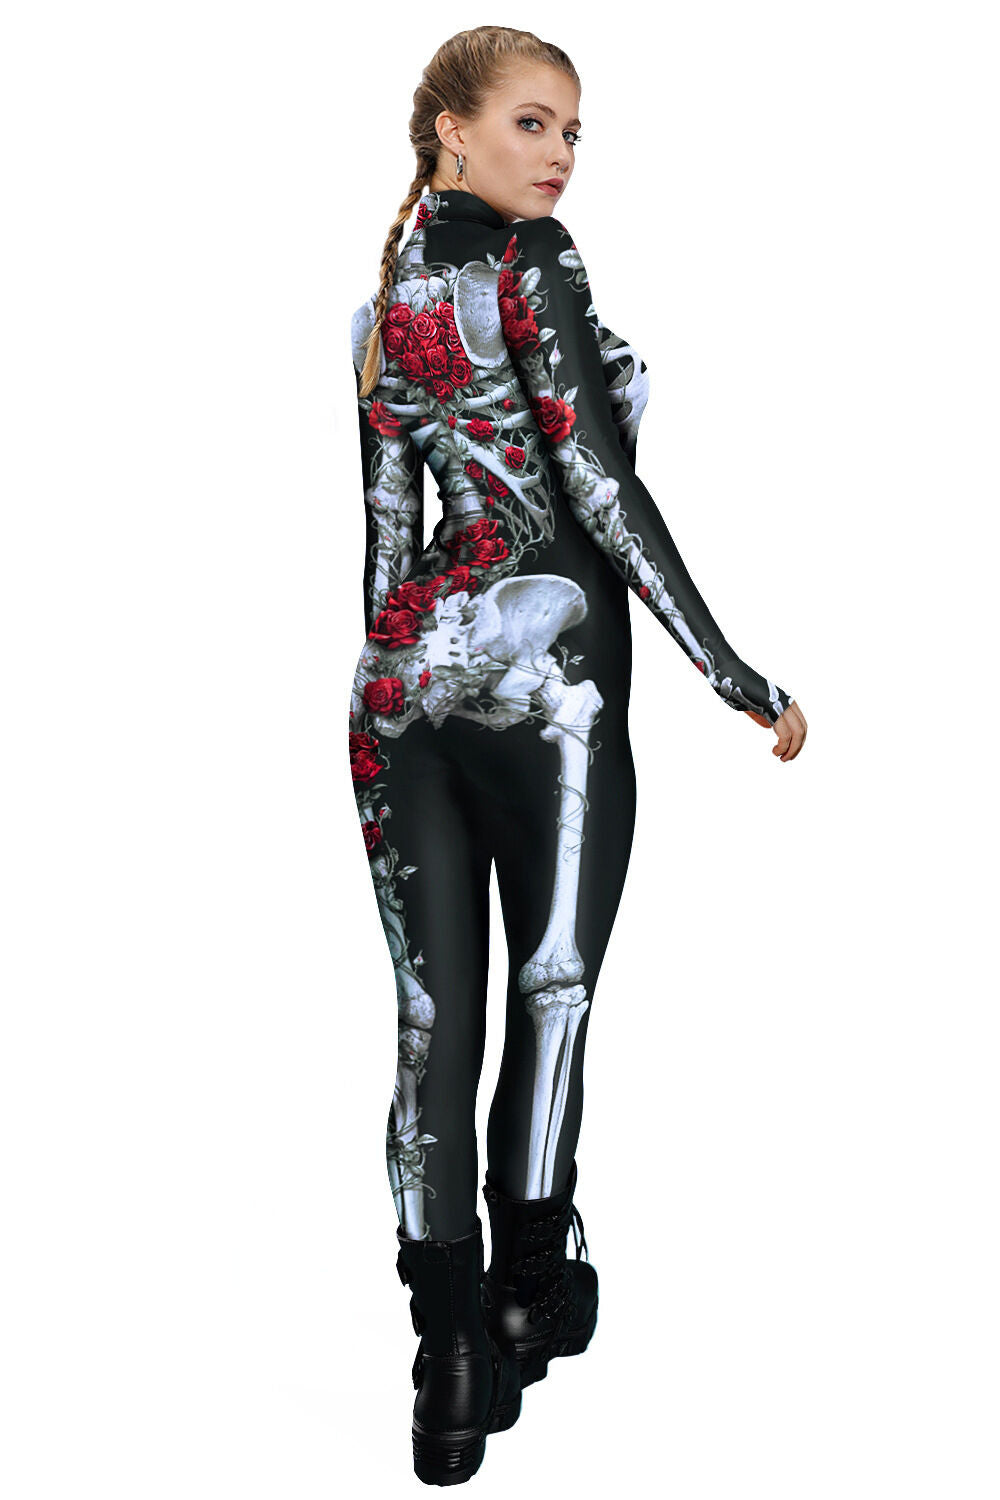 Halloween Scary Skeleton Rose Catsuit Costume